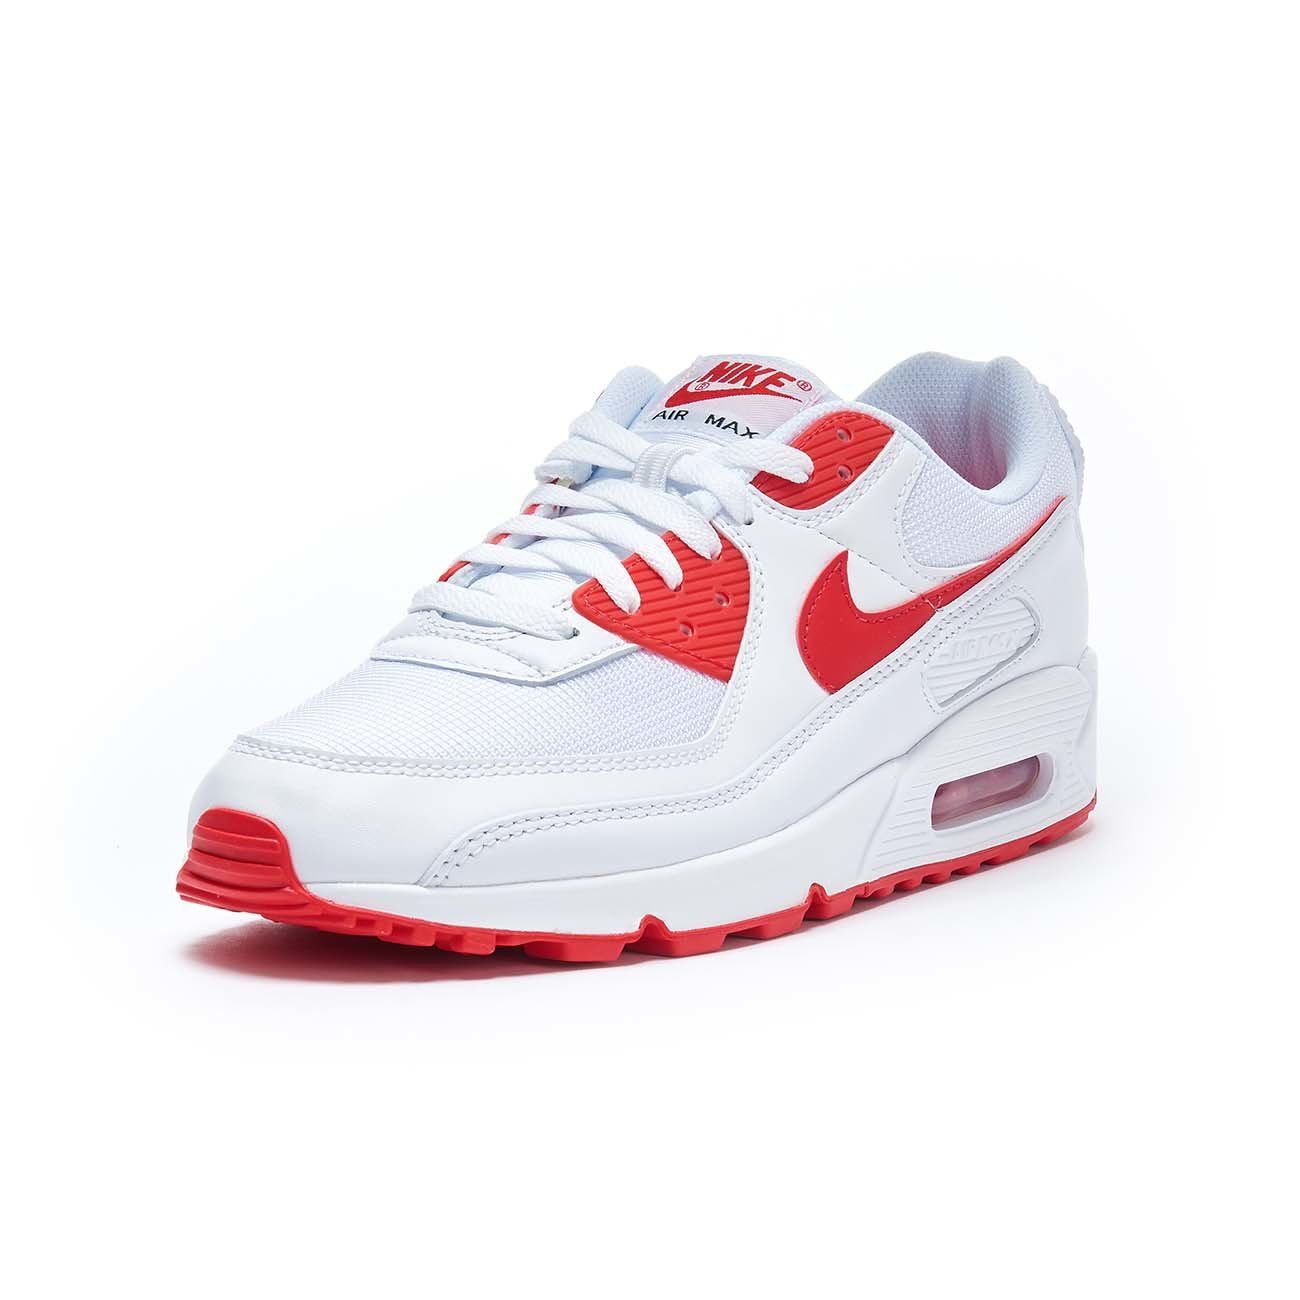 NIKE AIR MAX 90 SNEAKERS Man White Hyper red | Mascheroni Store ارواج محمود سعيد